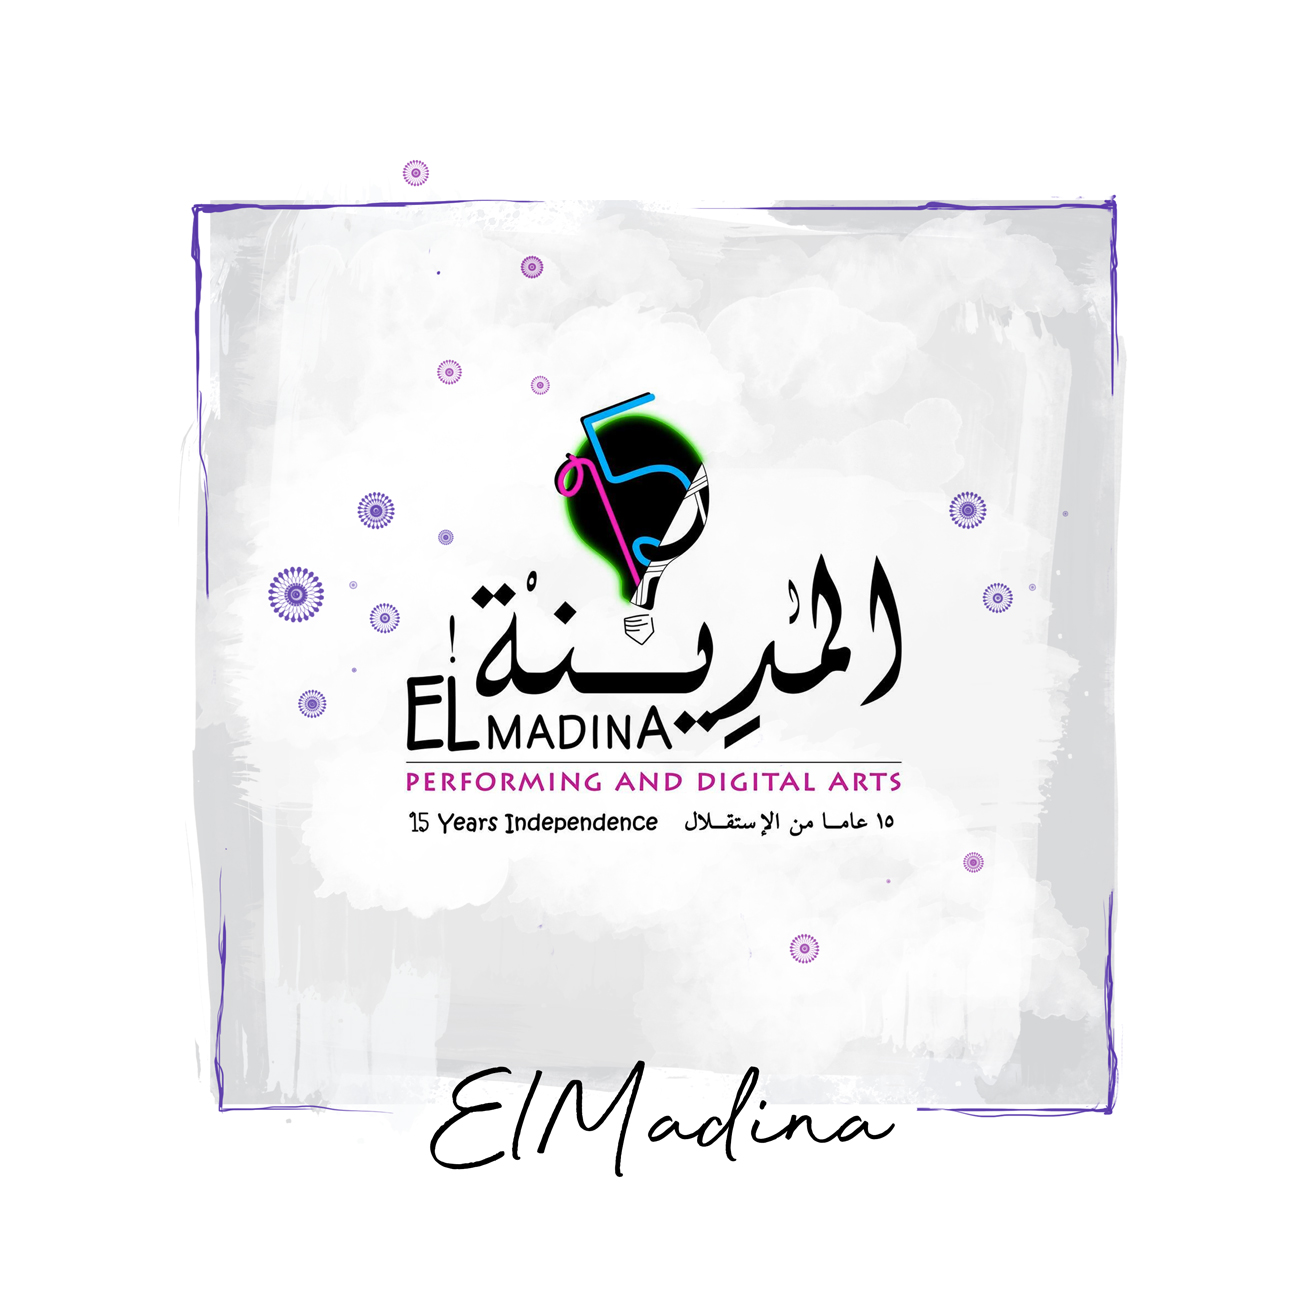 #IndexAwards2019: ElMadina for Performing and Digital Arts challenges Egypt’s restrictive laws